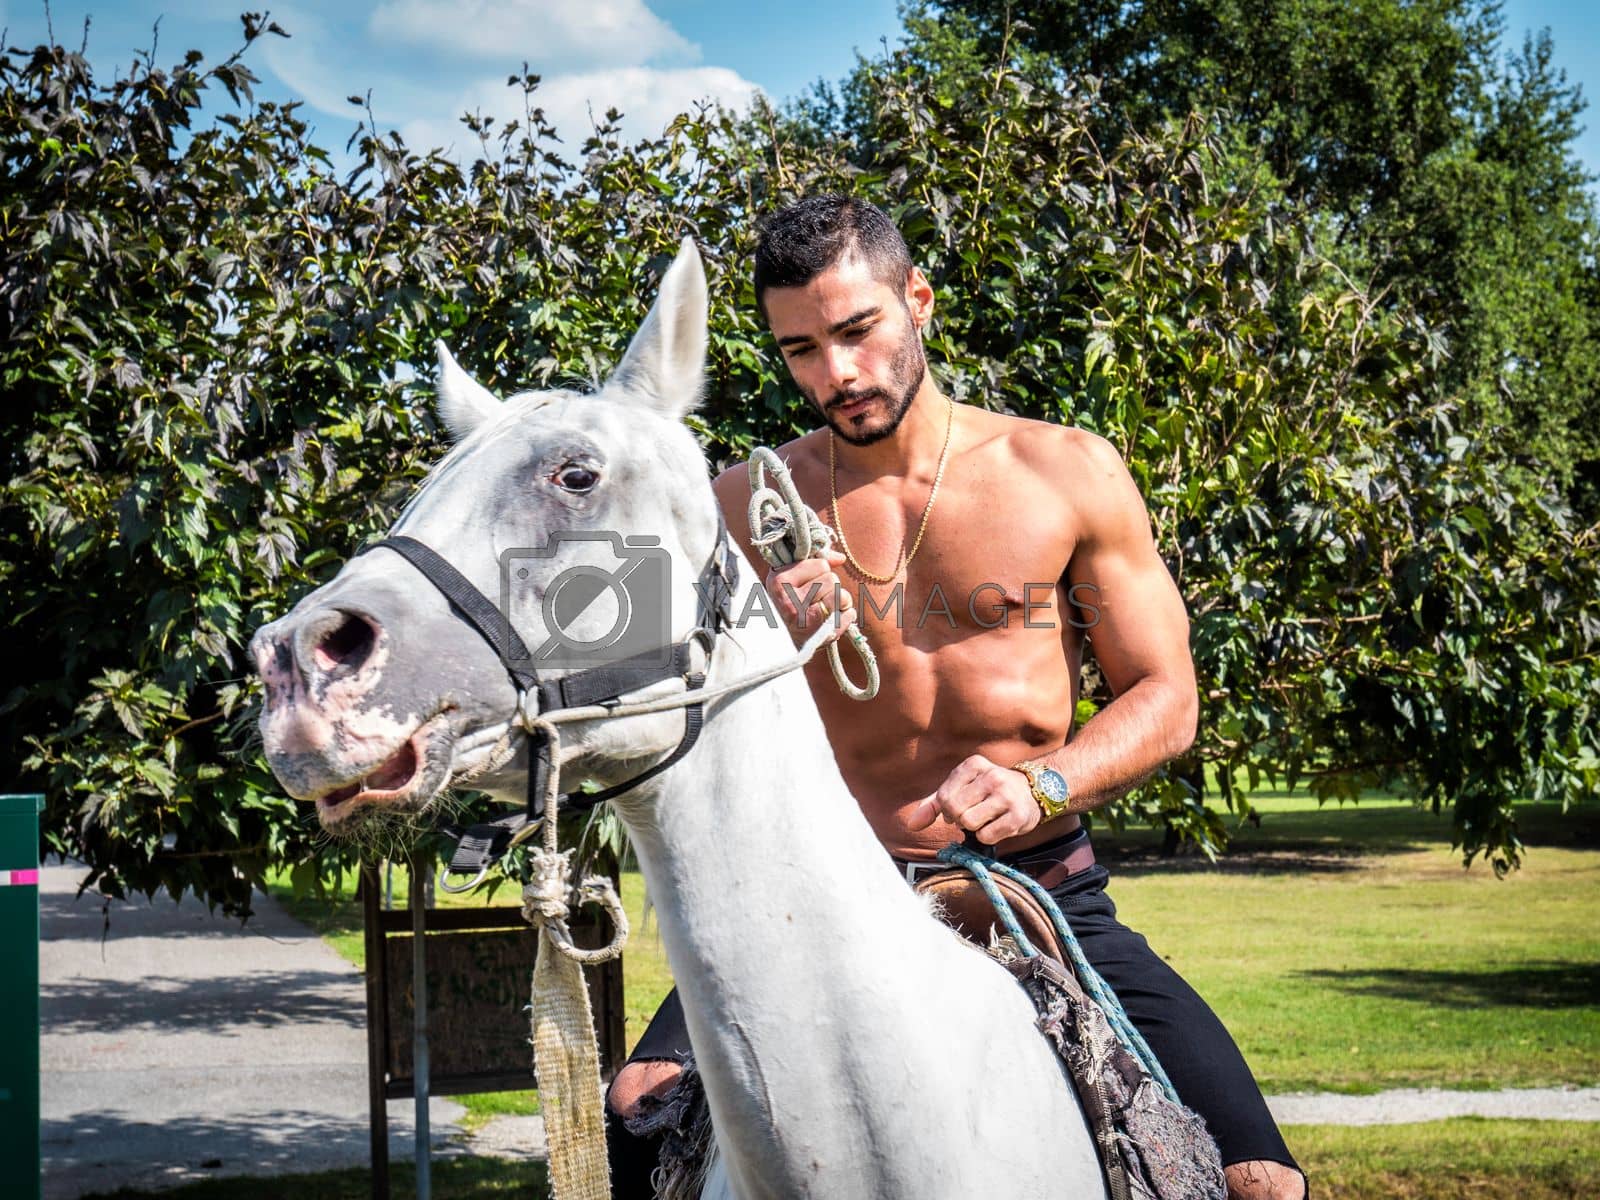 Royalty free image of Sexual shirtless man on horse by artofphoto